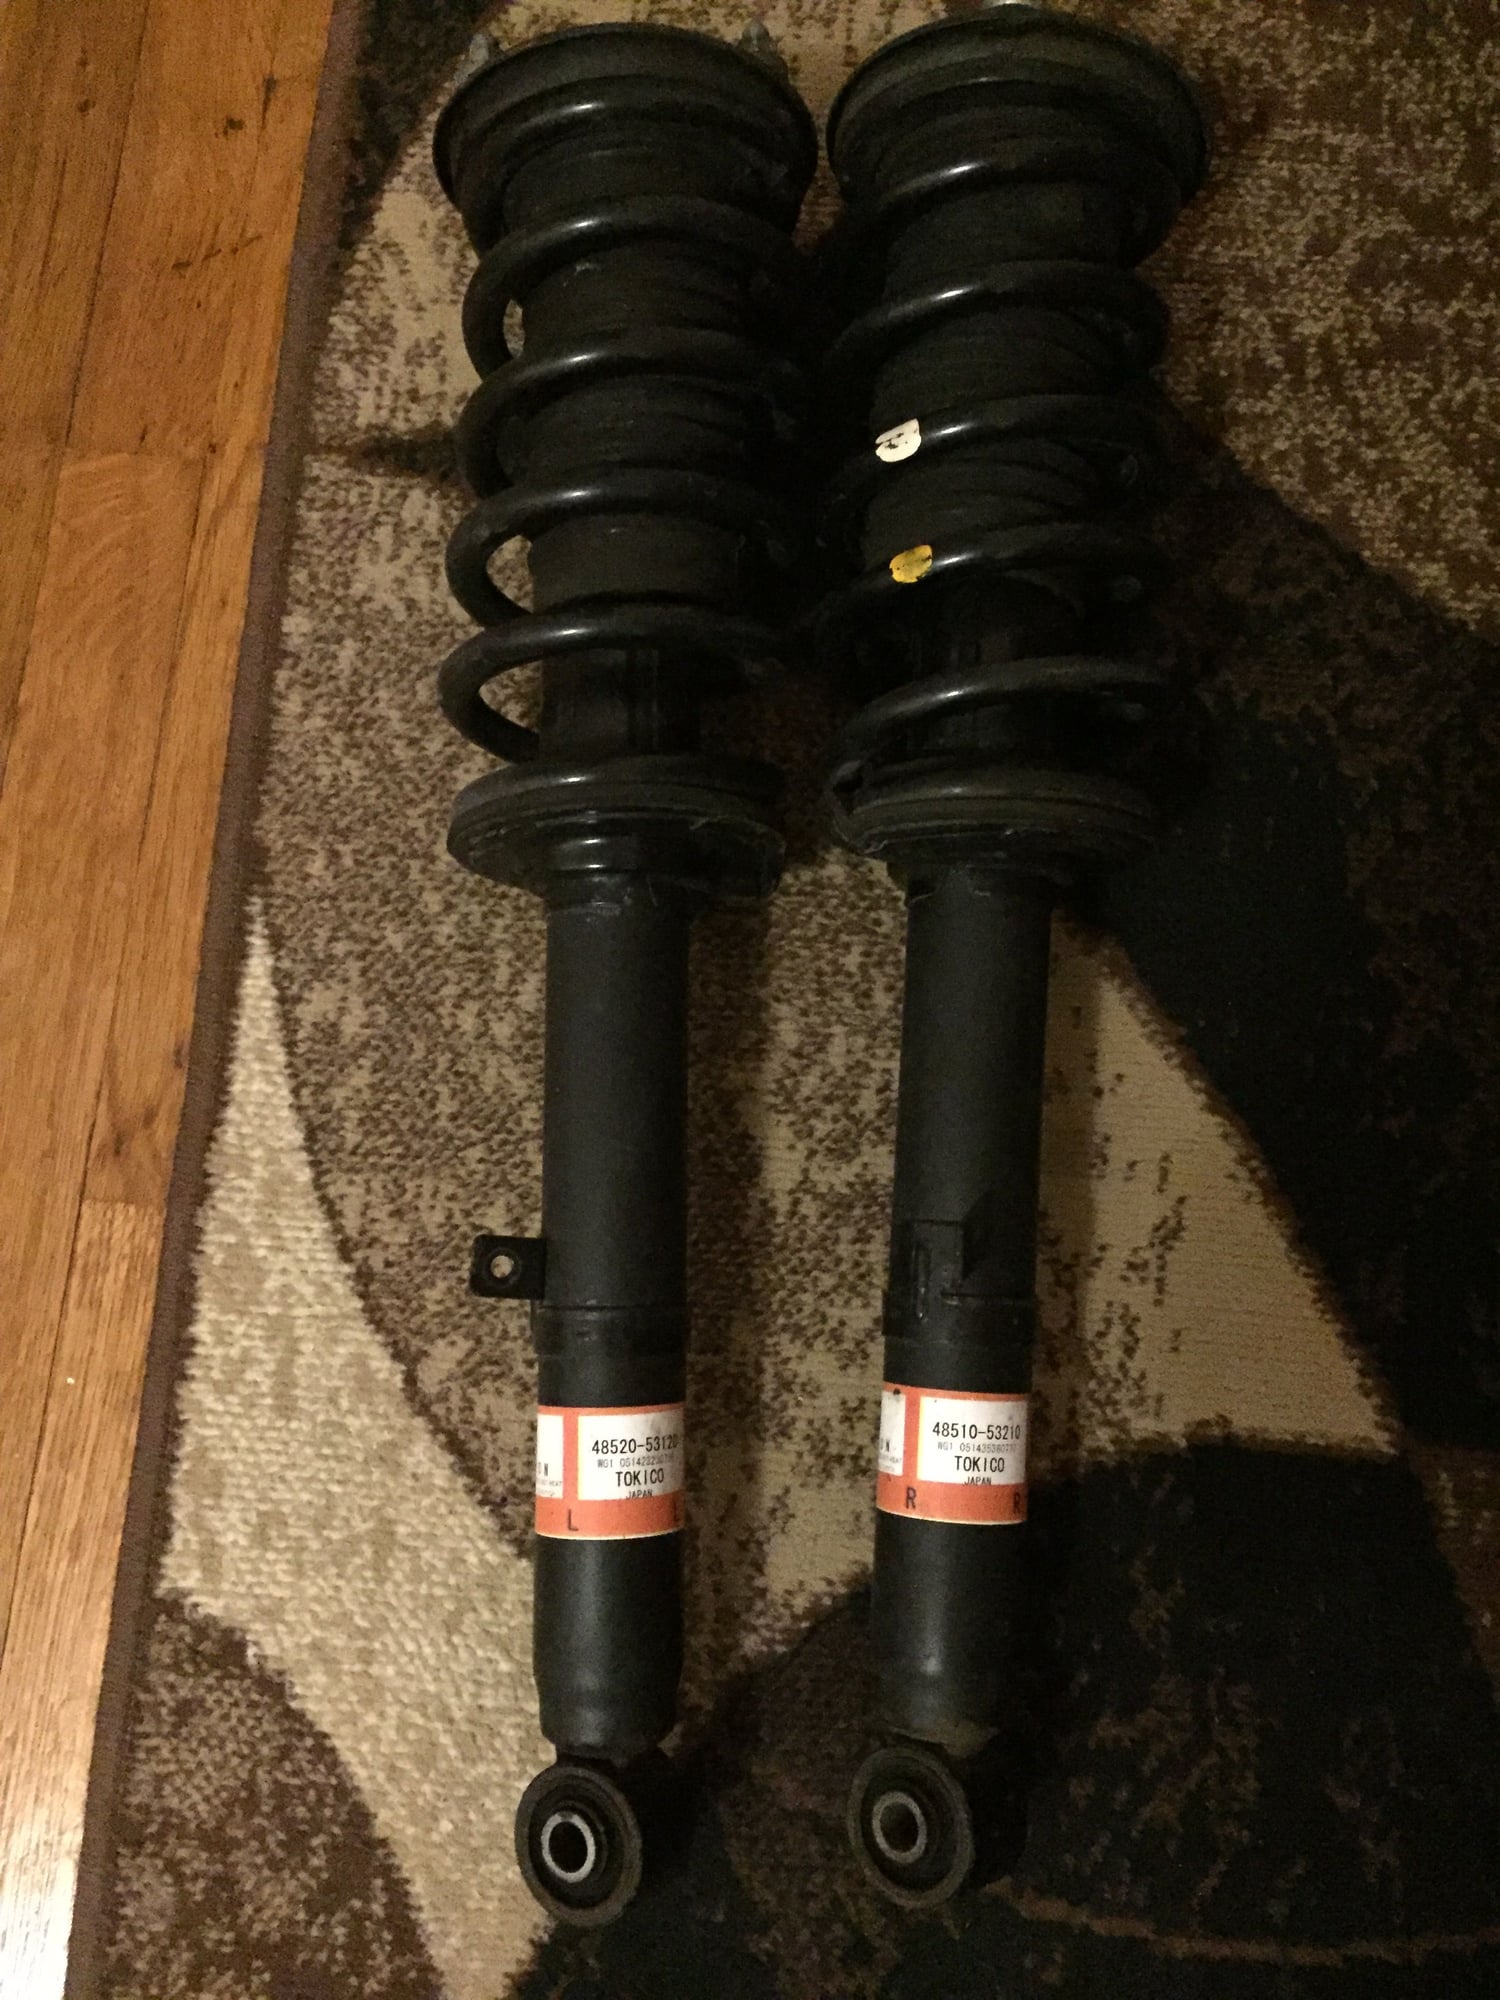 Steering/Suspension - 2013 LEXUS ISC front shocks assemblies - Used - 2010 to 2013 Lexus IS250 - Forest Hills, NY 11375, United States